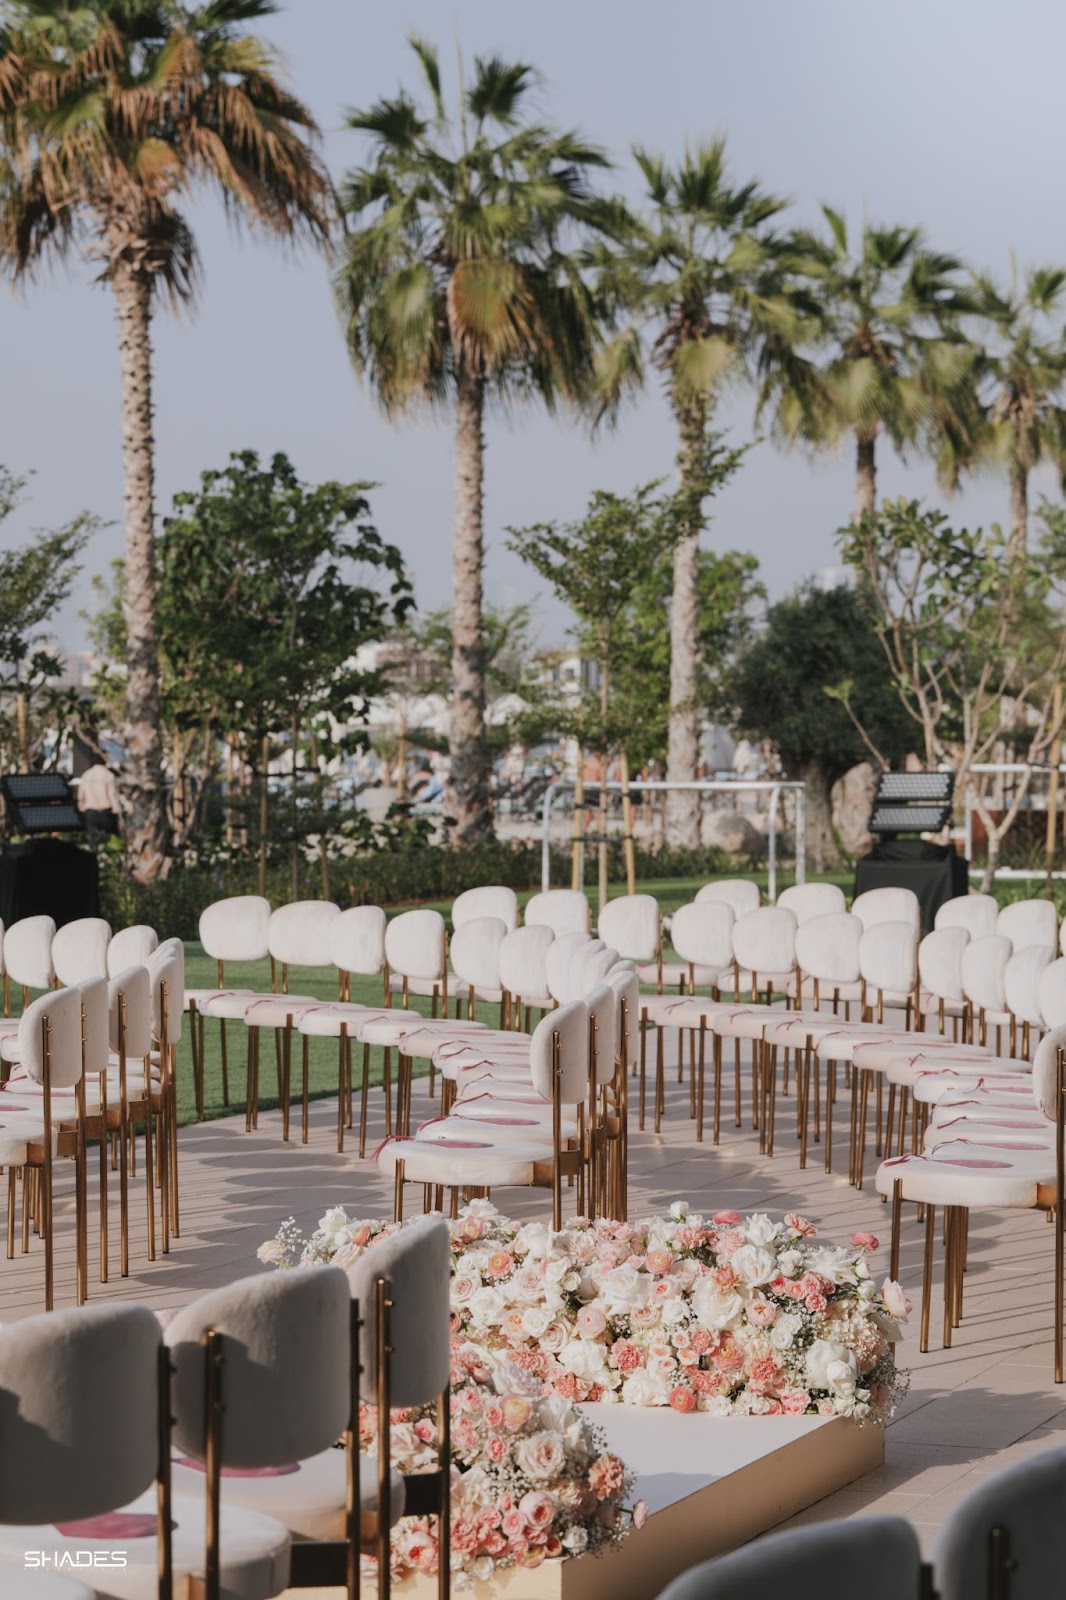 Carousel Weddings & Events Shares Why You Should Plan Your Dream Destination Wedding in Dubai in an Exclusive Interview